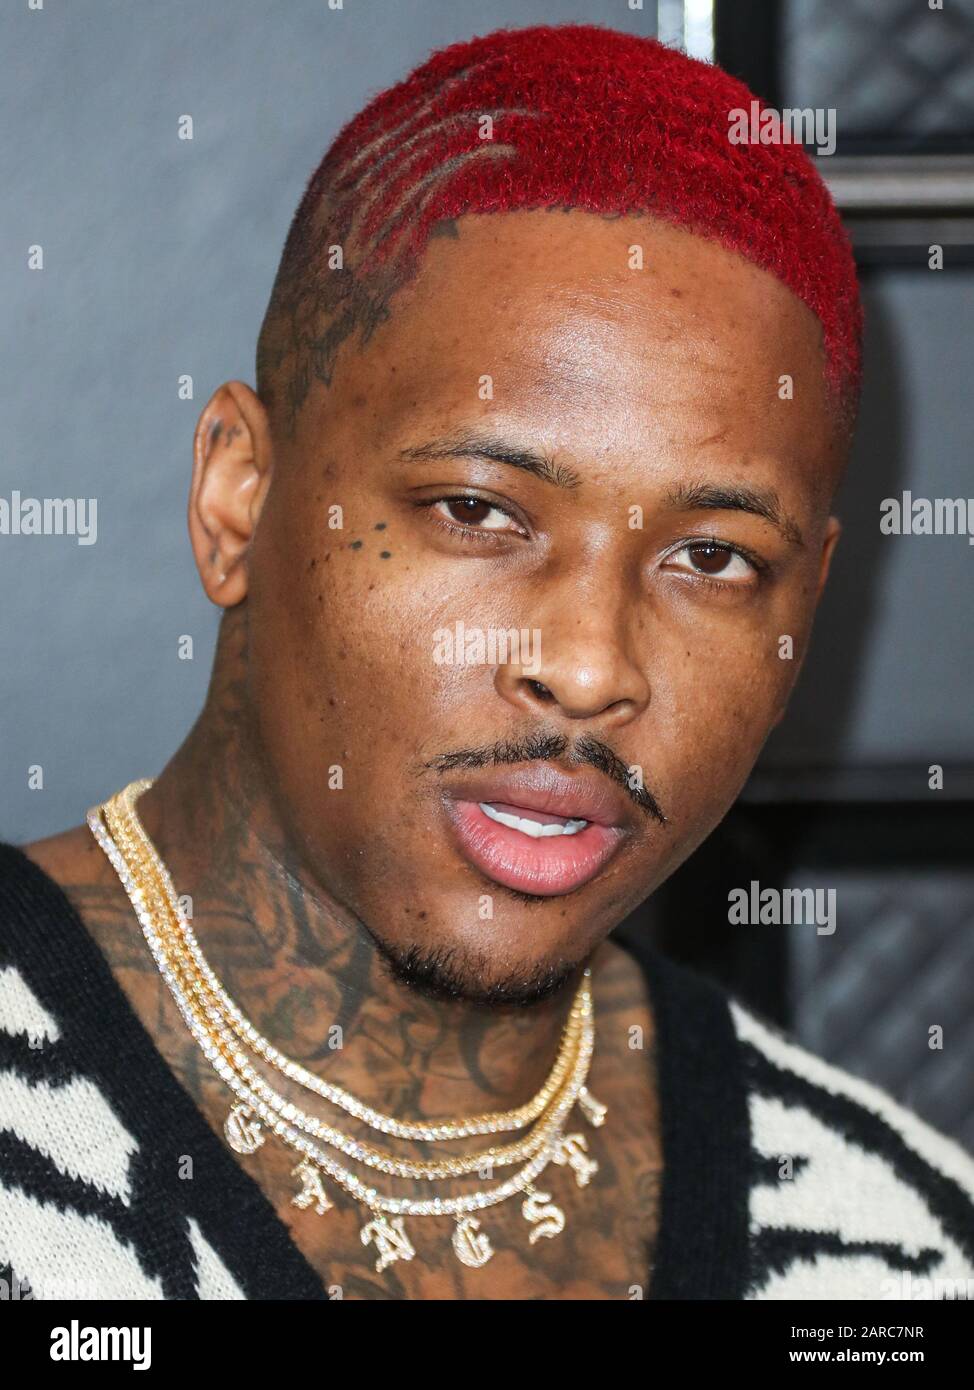 LOS ANGELES, CALIFORNIA, USA - JANUARY 26: YG arrives at the 62nd Annual GRAMMY Awards held at Staples Center on January 26, 2020 in Los Angeles, California, United States. (Photo by Xavier Collin/Image Press Agency) Stock Photo